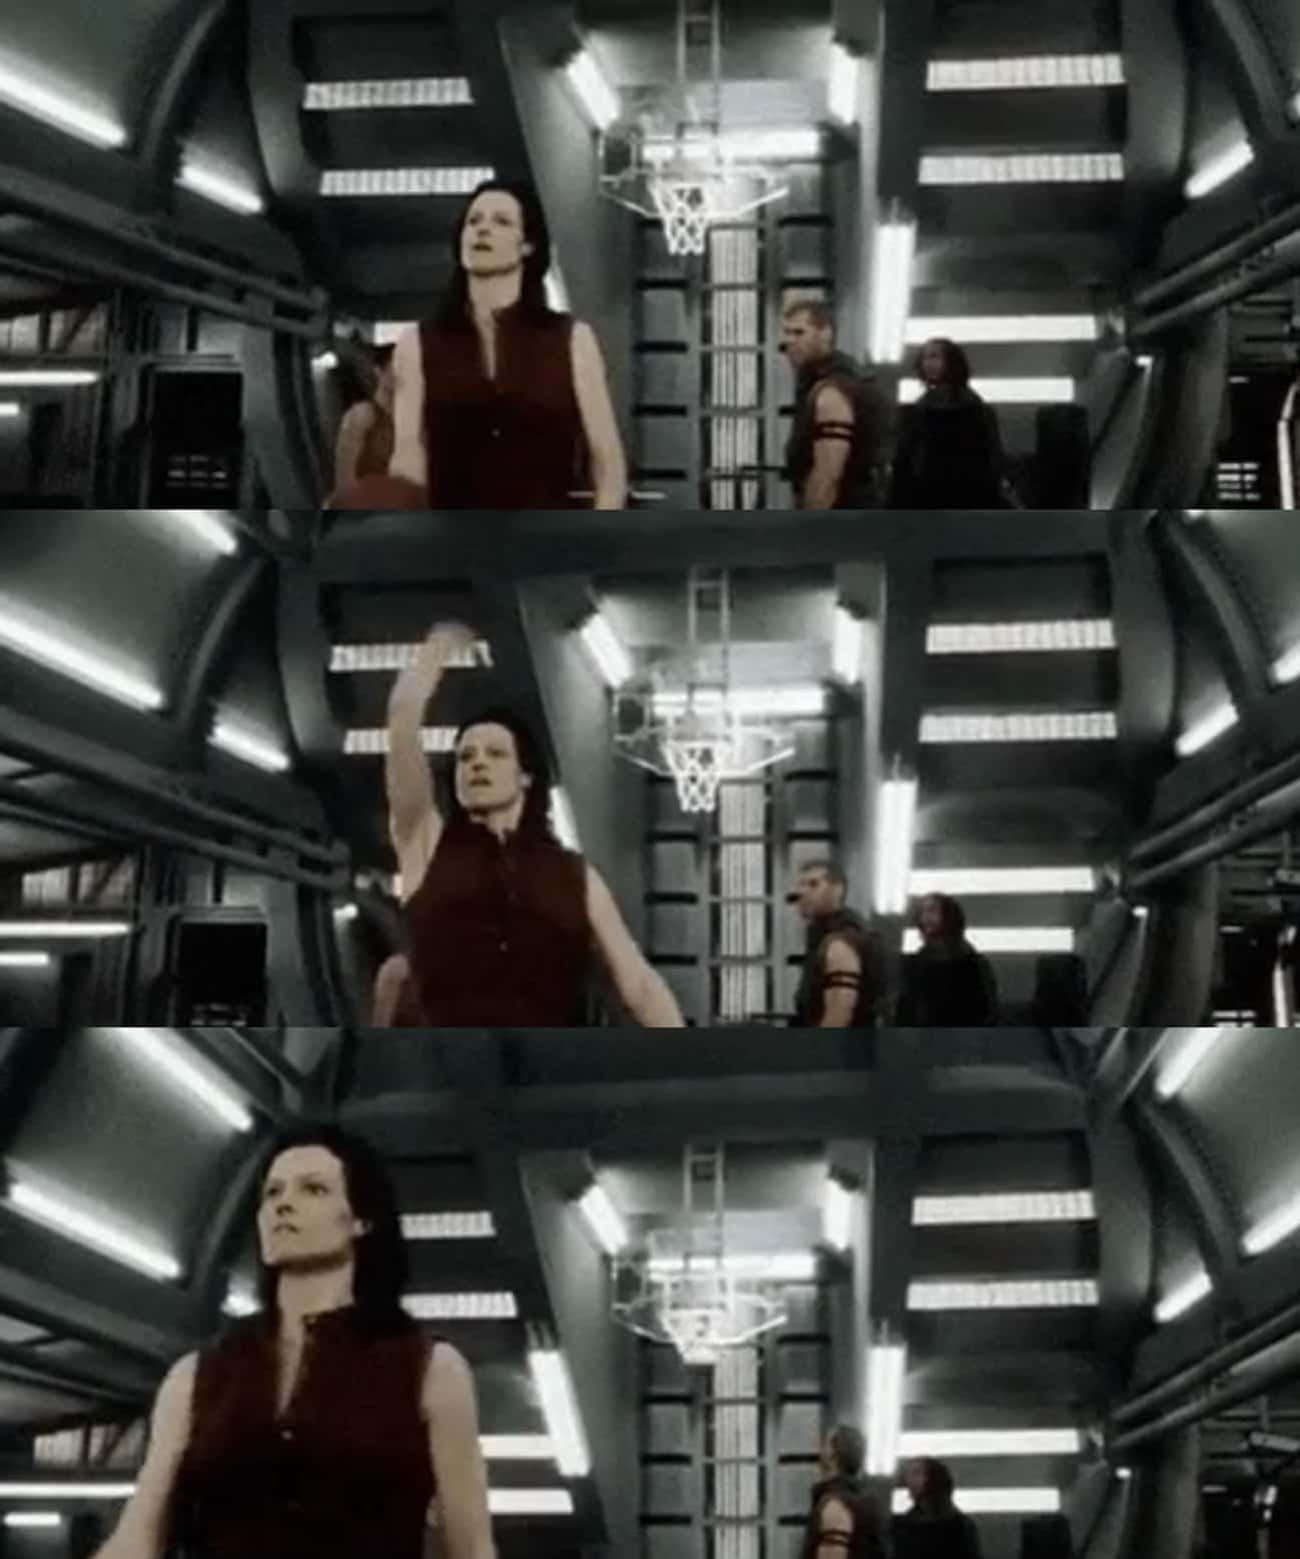 Sigourney Weaver Really Made That One-In-A-Million Basketball Shot For 'Alien Resurrection'